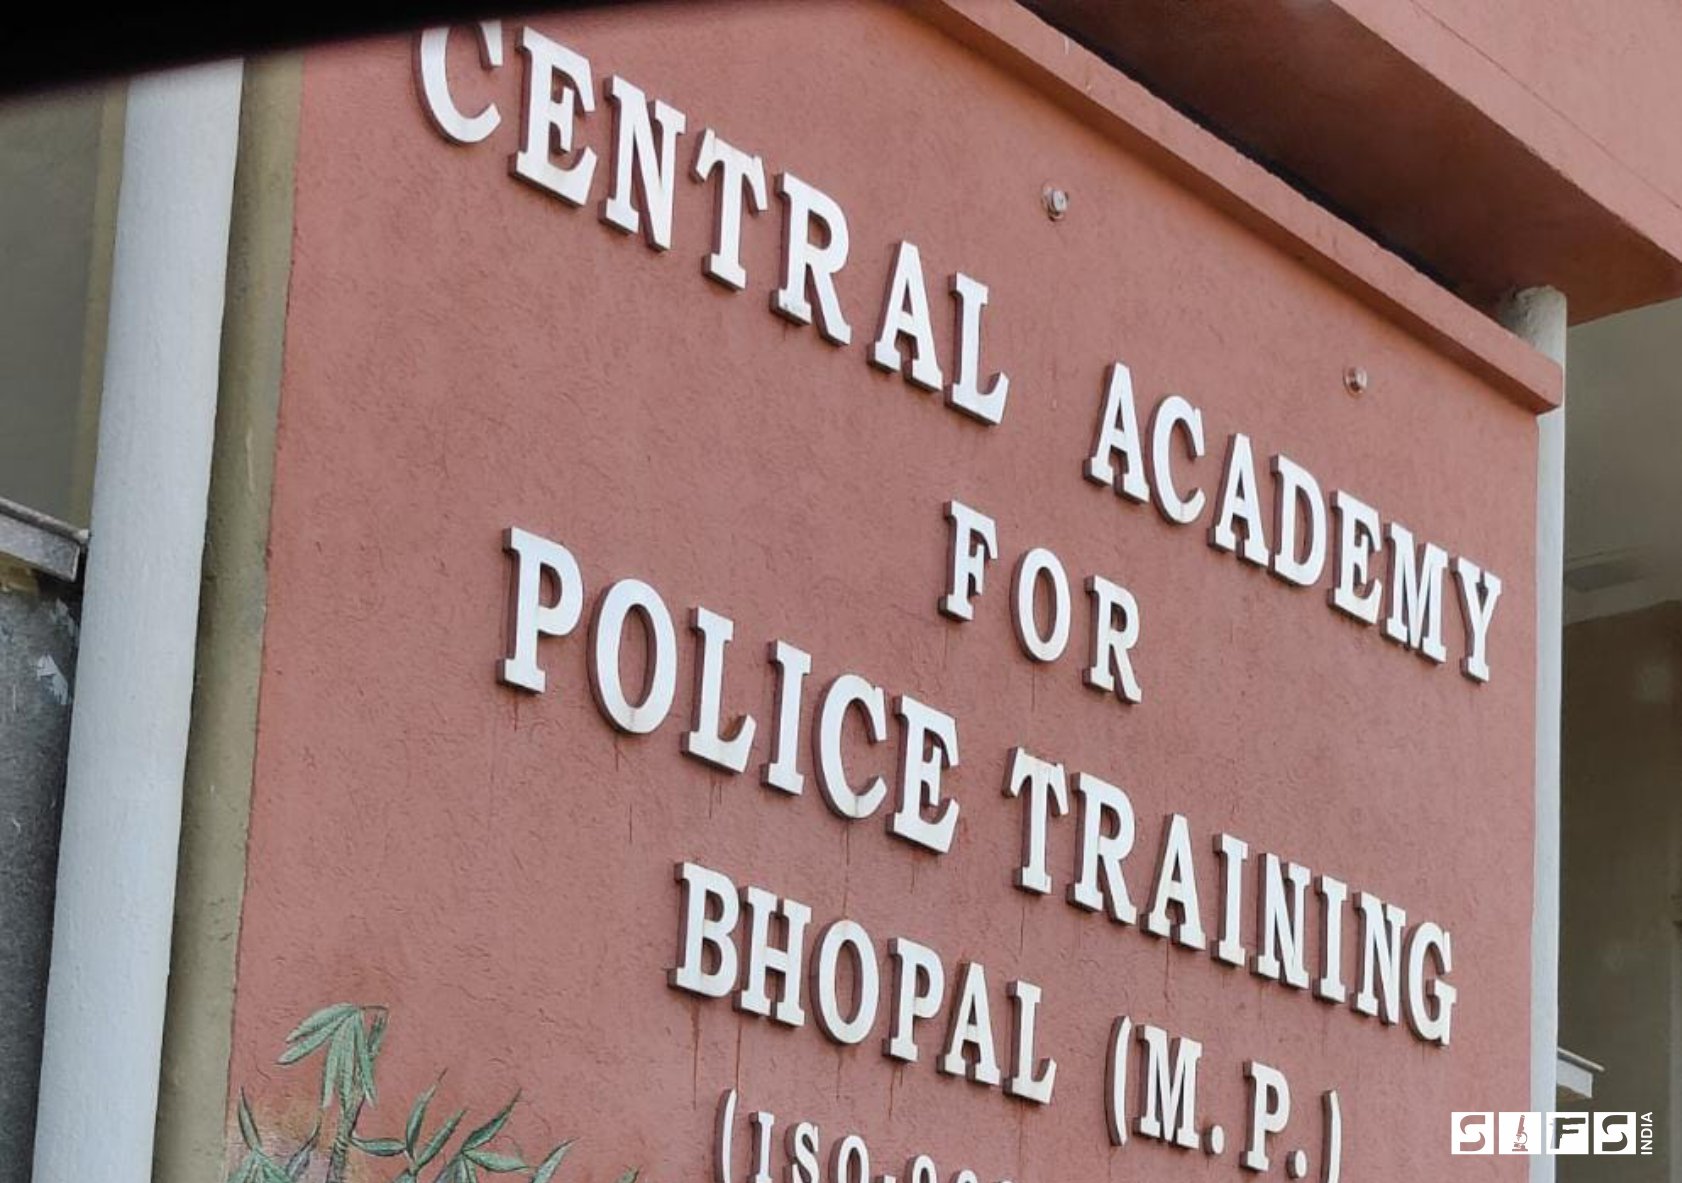 Police Training for DySP of Batch 21 at CAPT, Bhopal